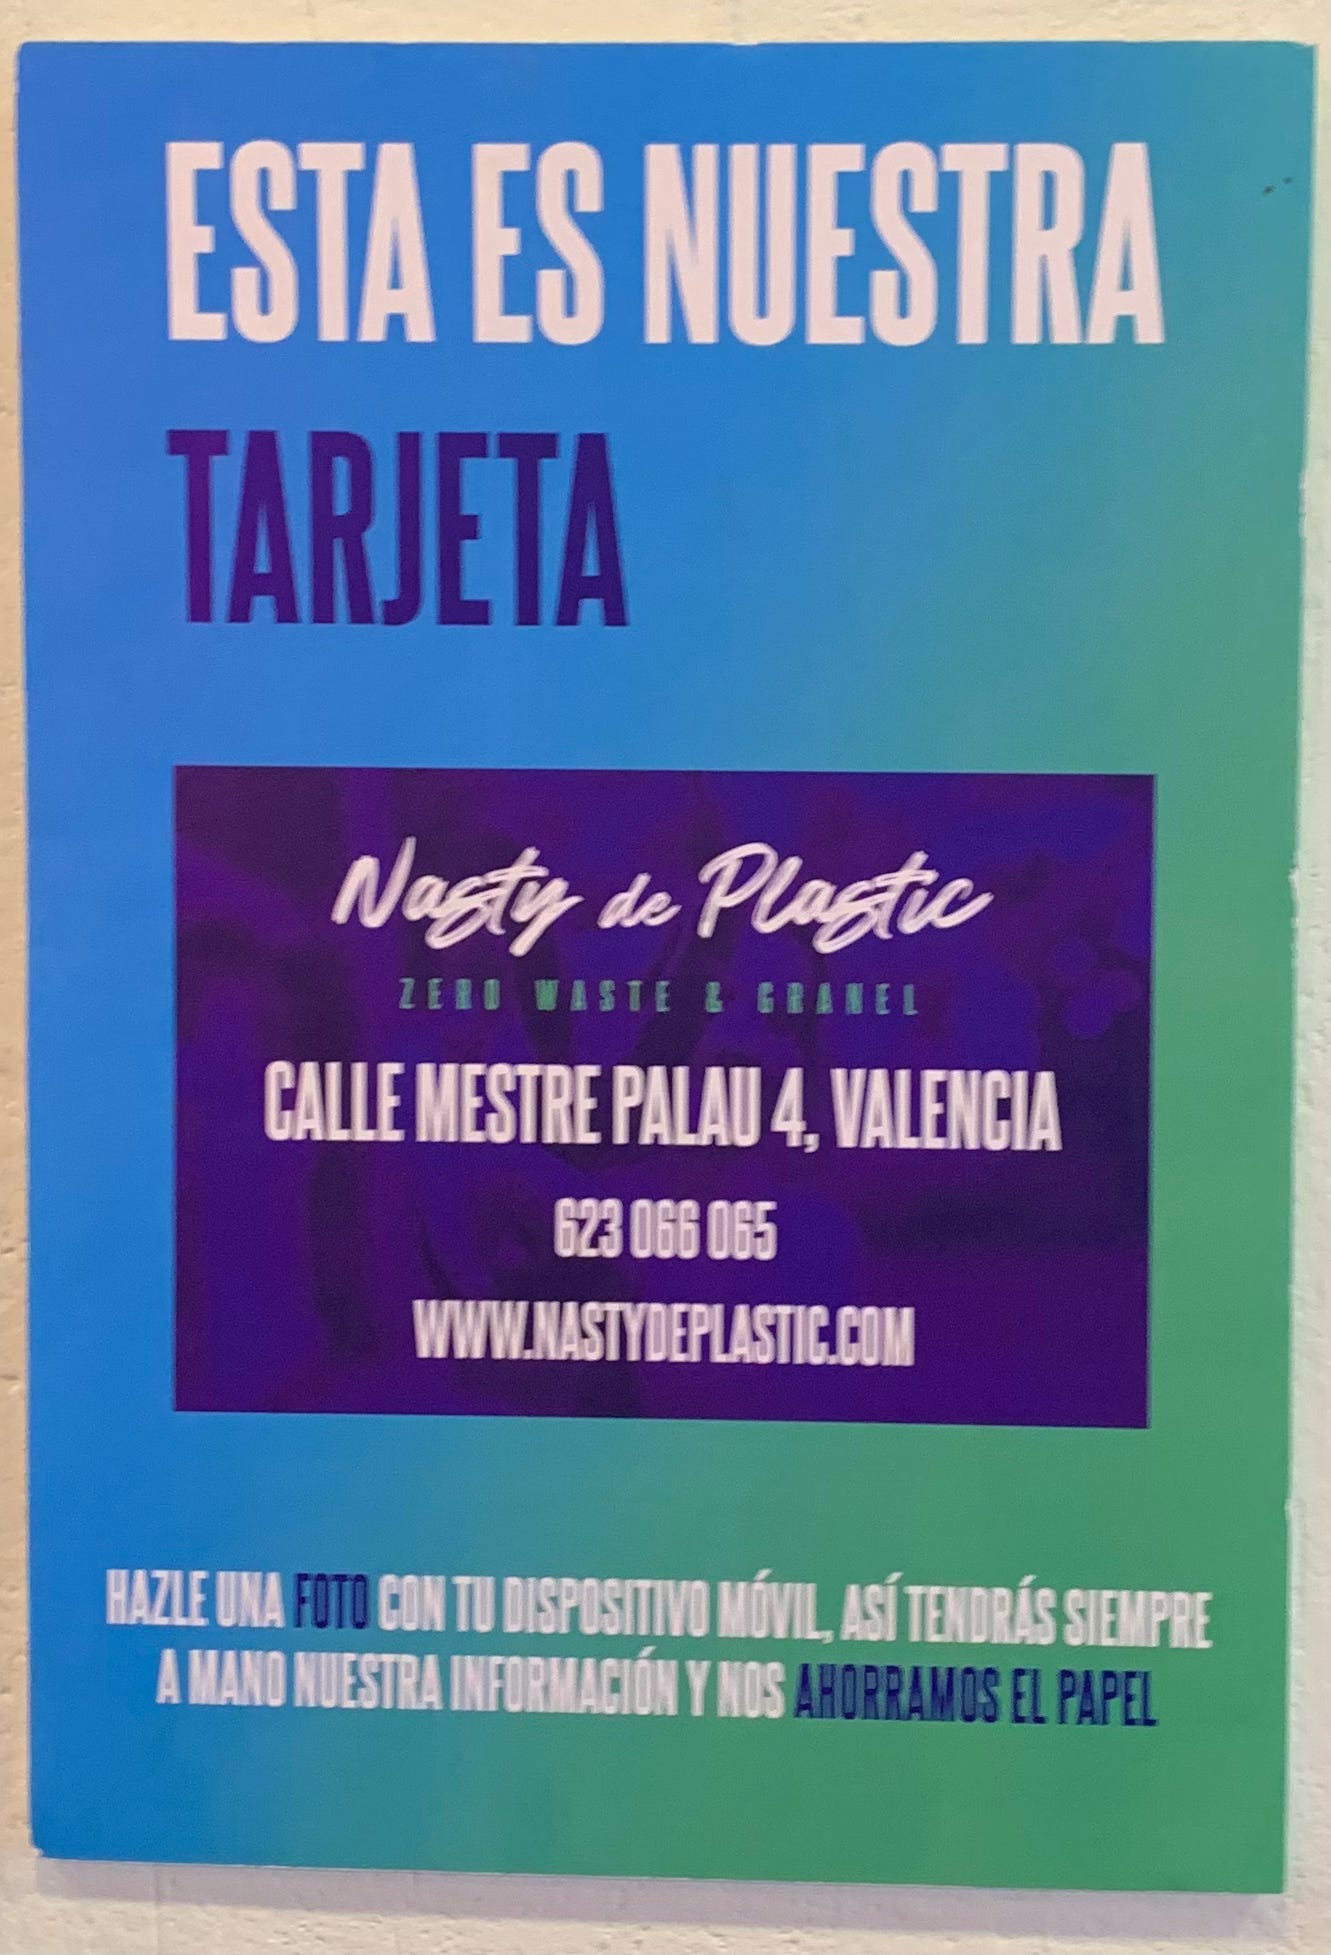 A poster in Spanish with the eco store's information. The store's real name is "Nasty de Plastic".